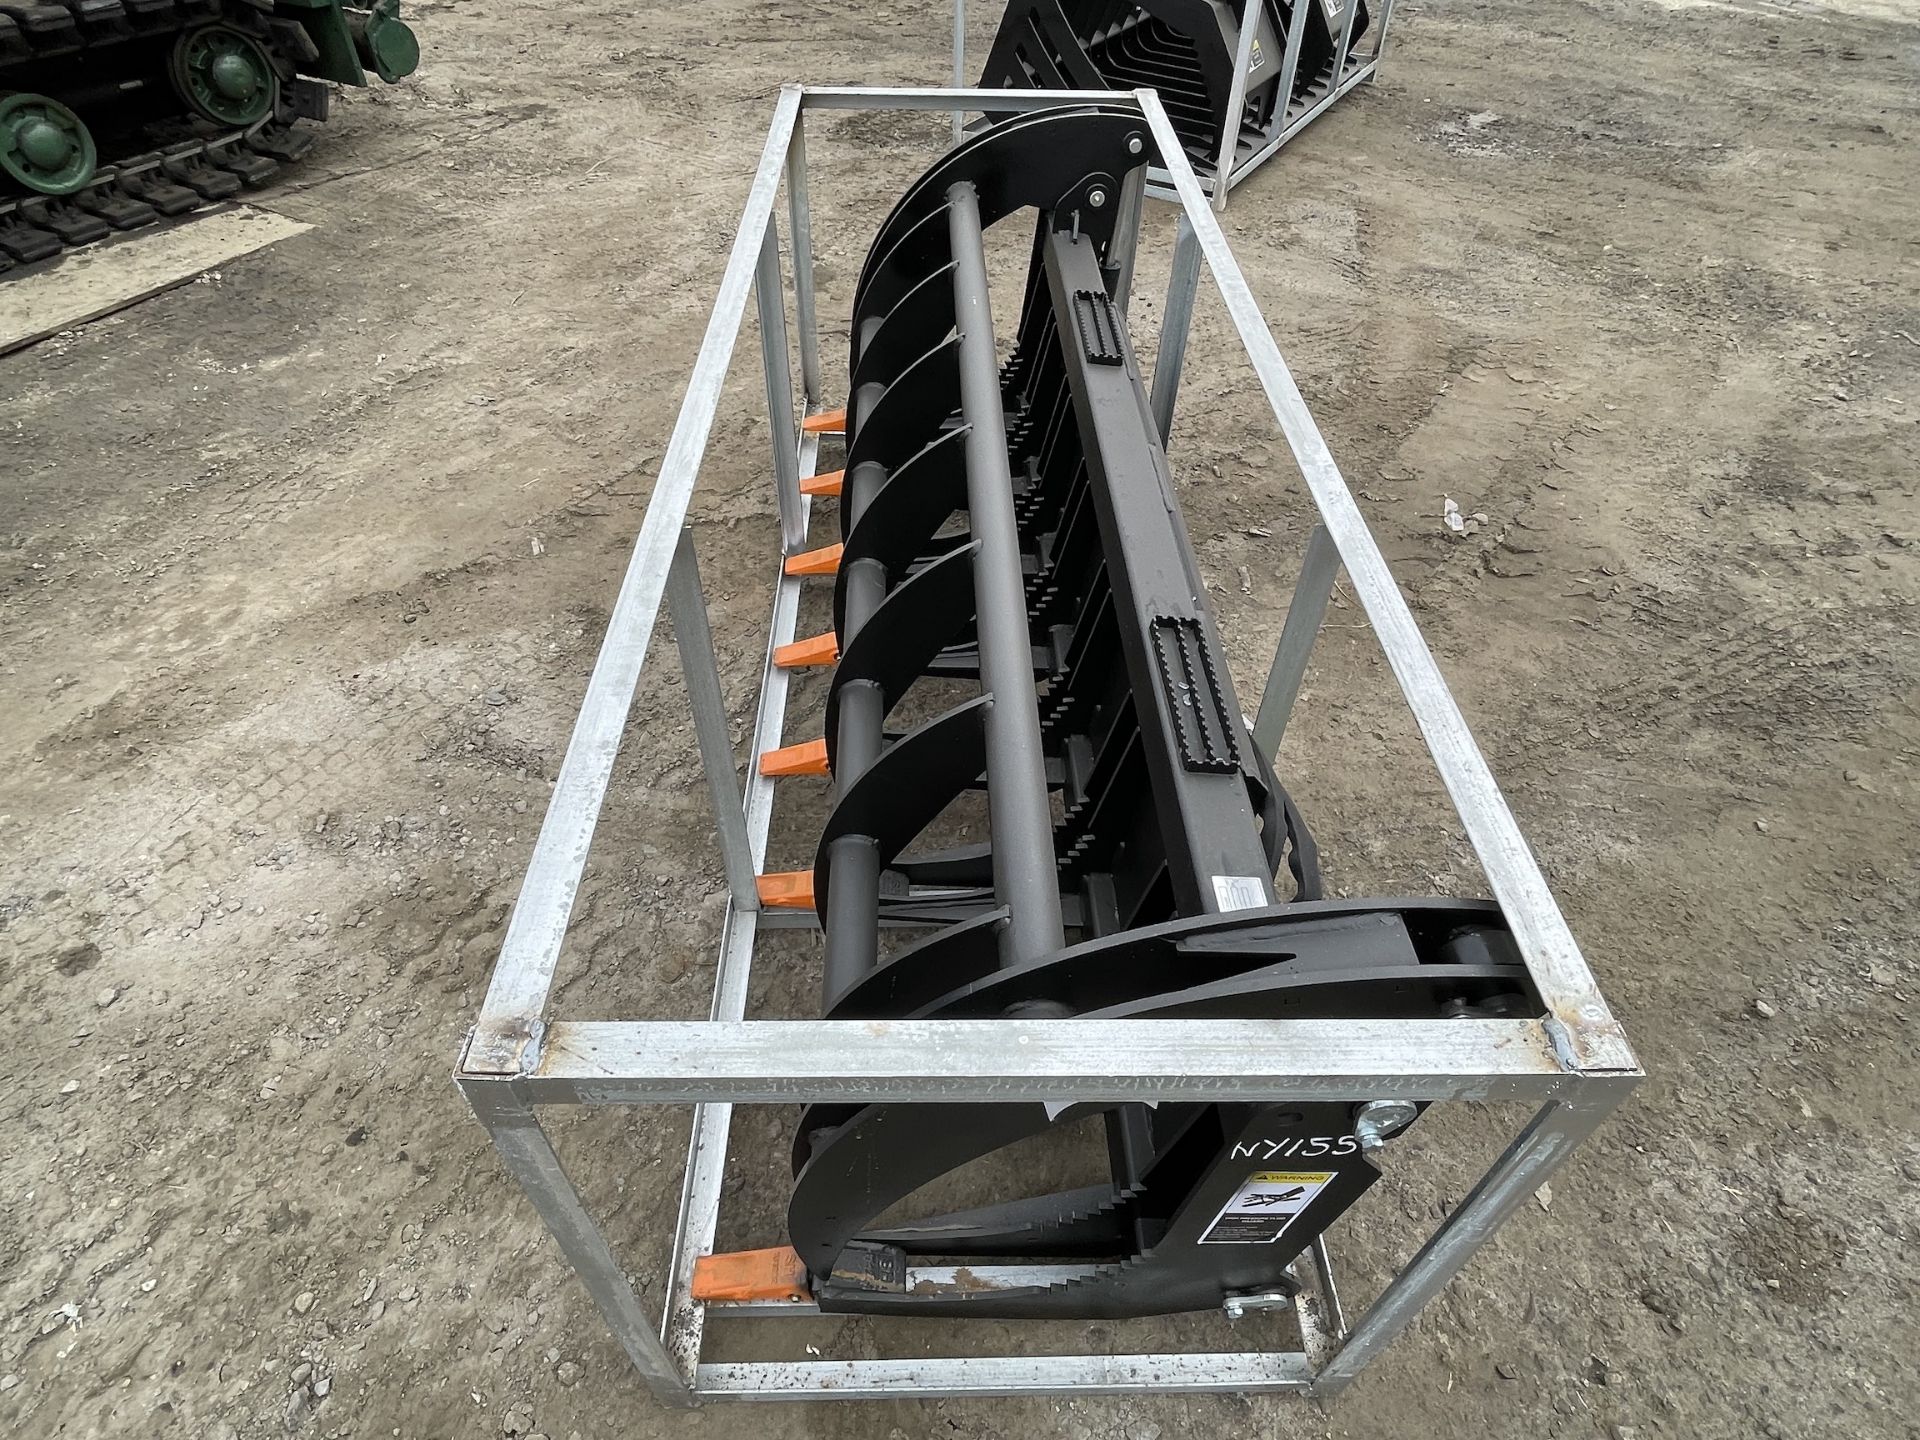 Brand New Greatbear Heavy Grass Fork Grapple Skid Steer Attachment (NY155) - Image 8 of 10